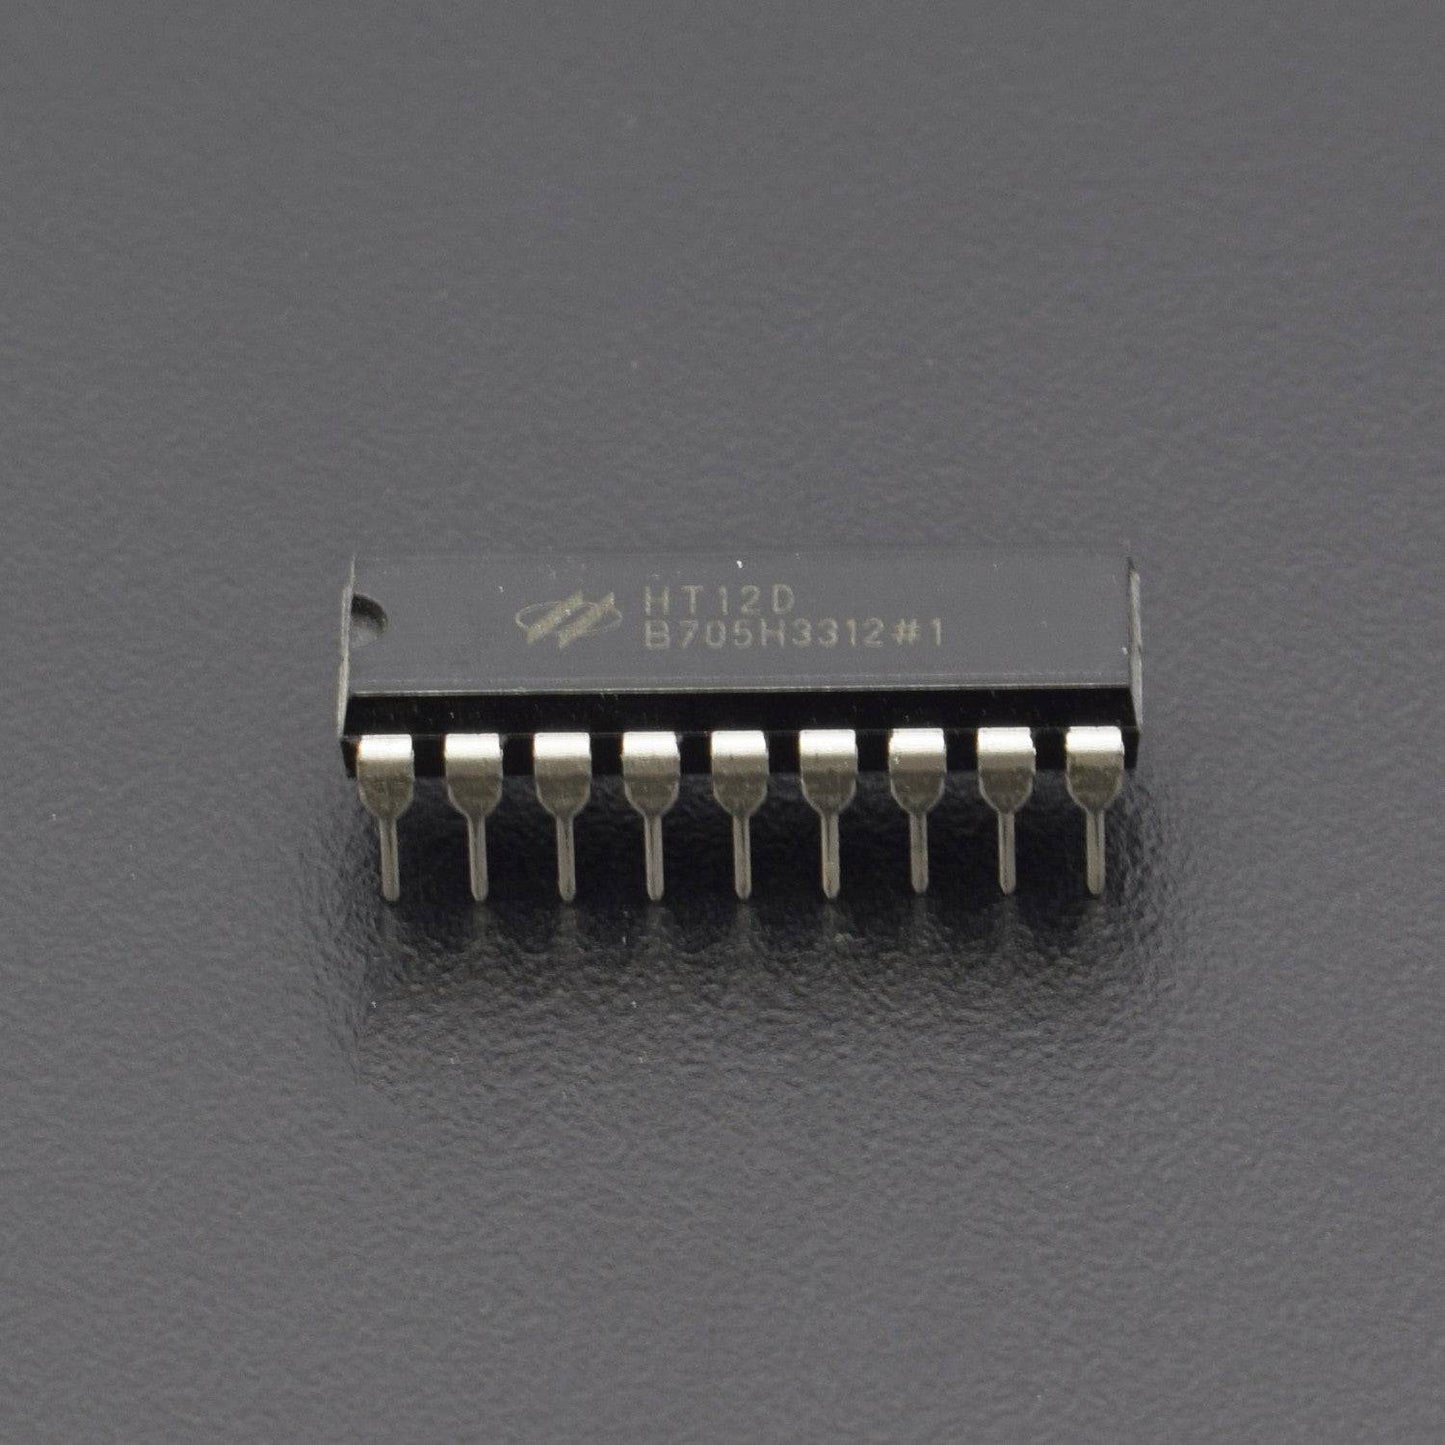 HT12D Decoder IC for Remote Control Systems  -  RS137 - REES52